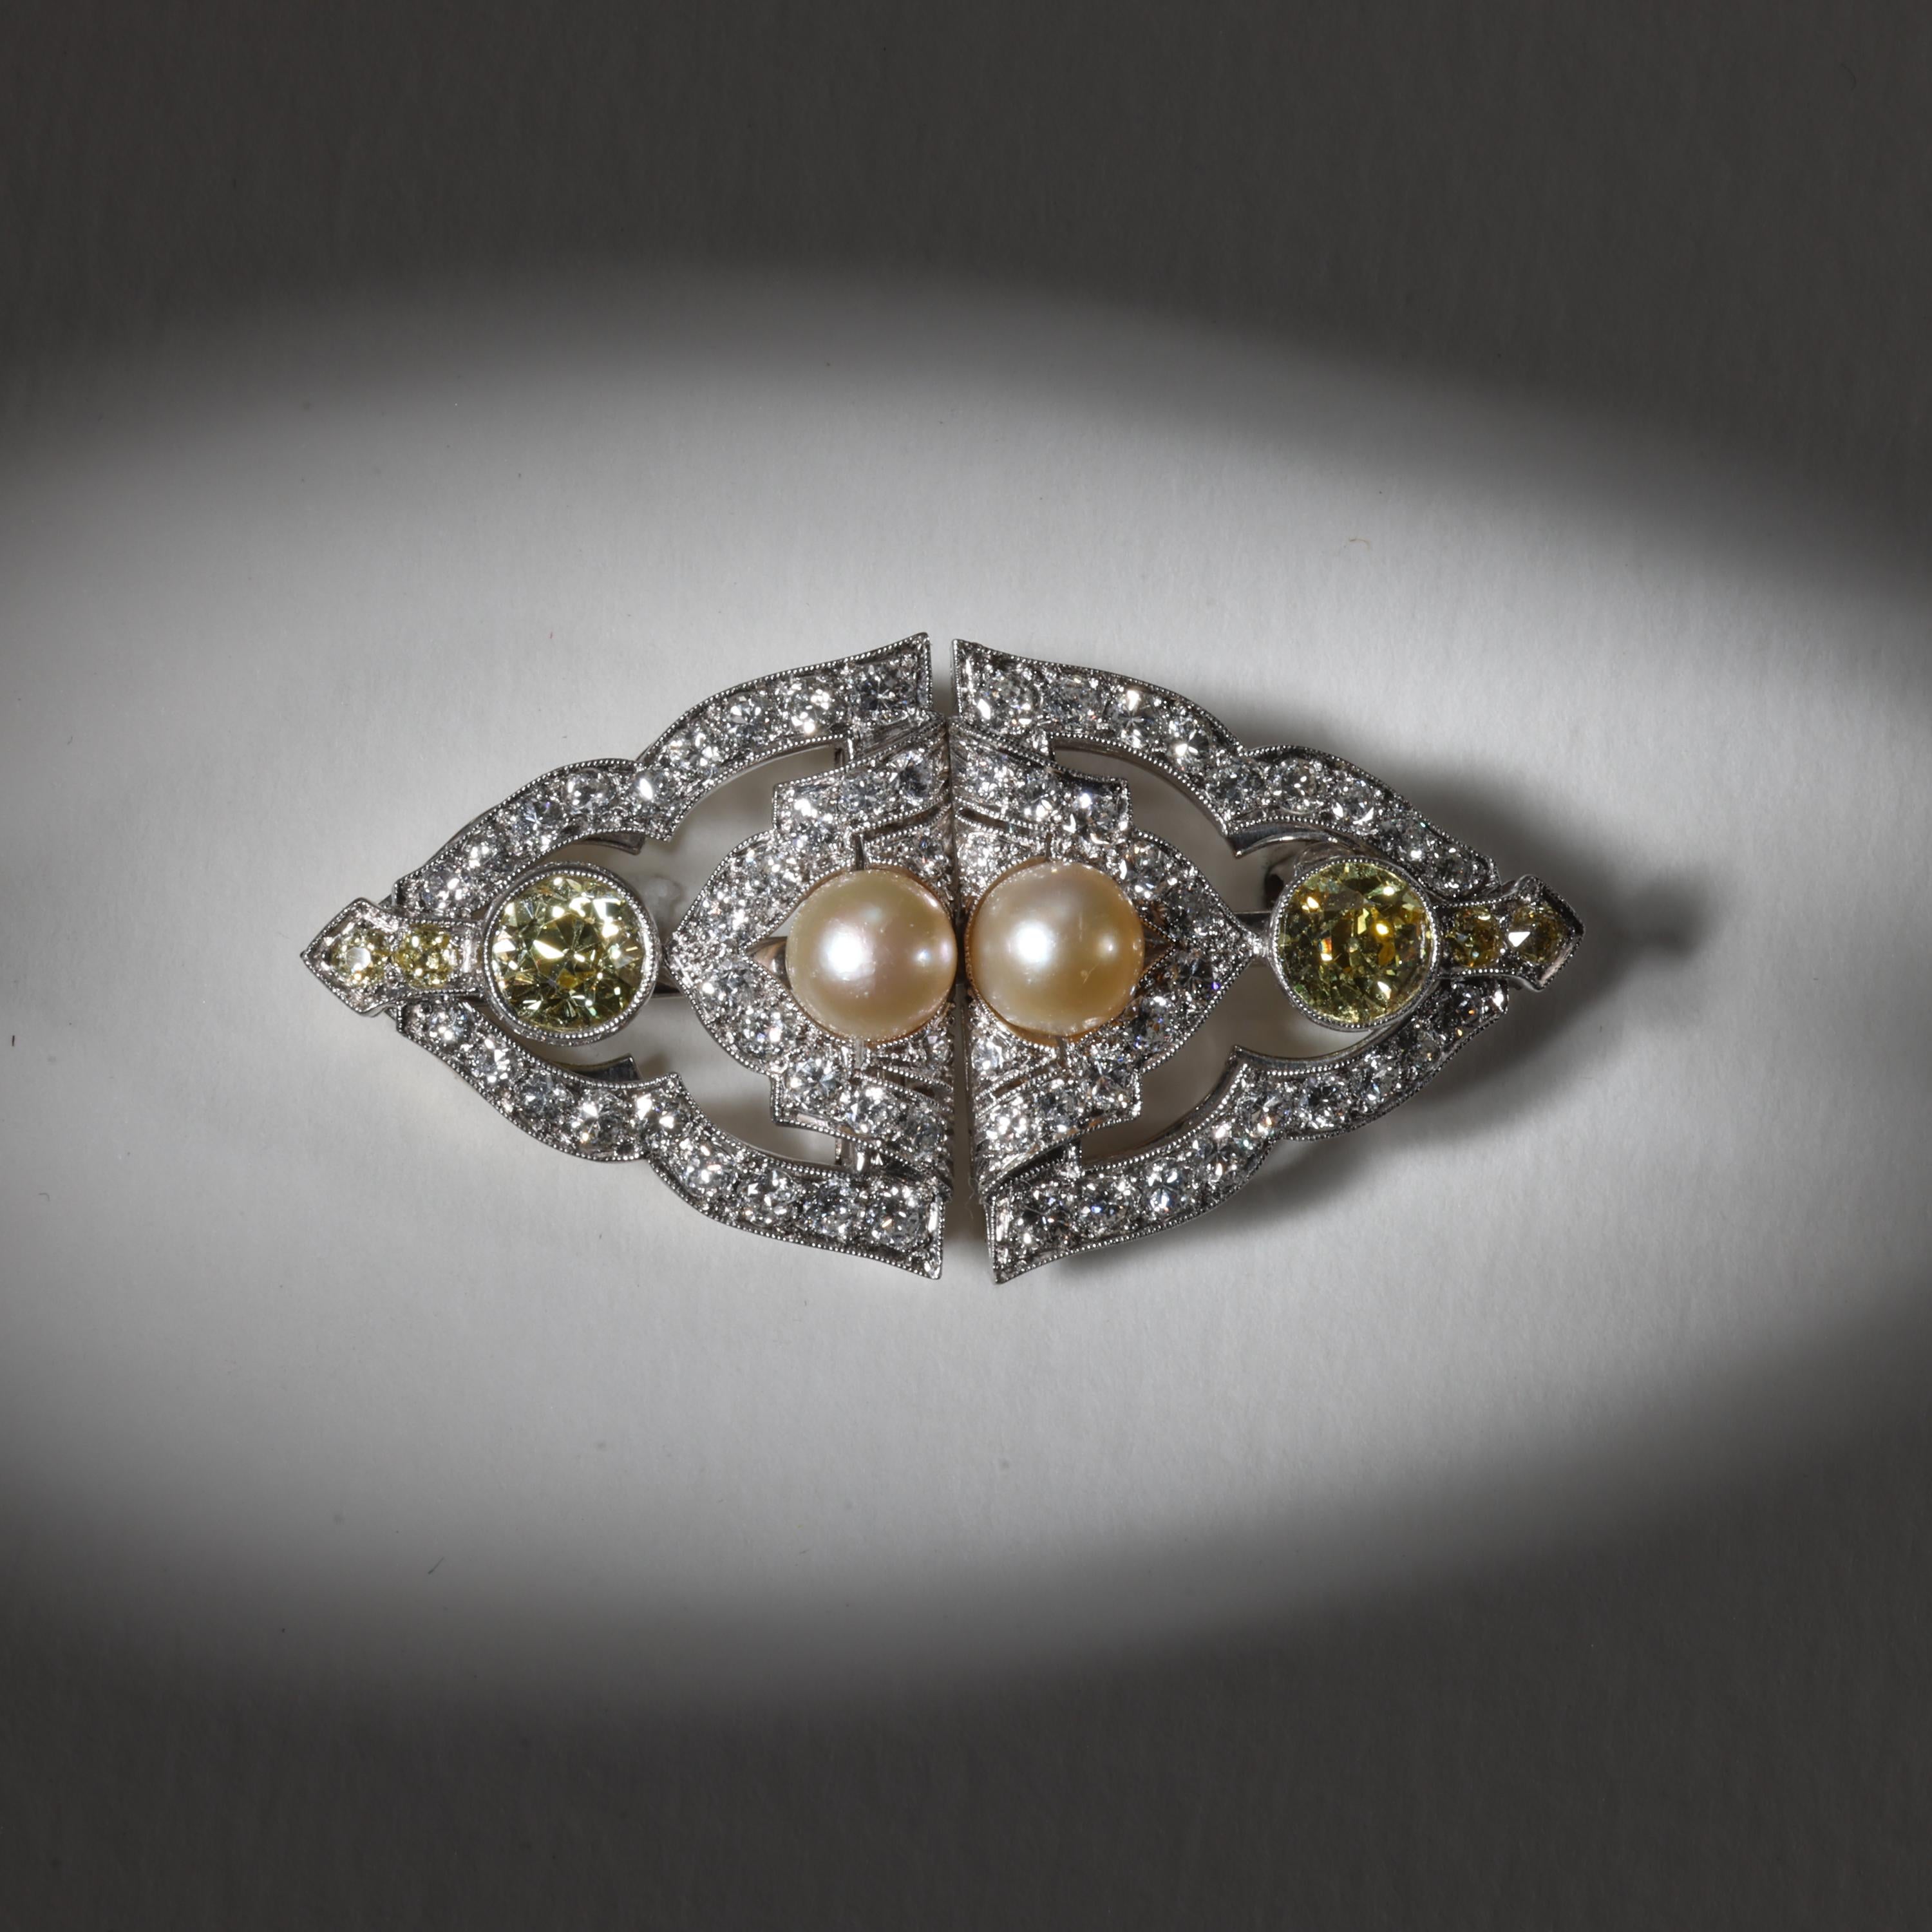 Dog Collar, Brooch: Art Deco Yellow Diamonds & Natural Pearls, Platinum, GIA In Excellent Condition For Sale In Southbury, CT